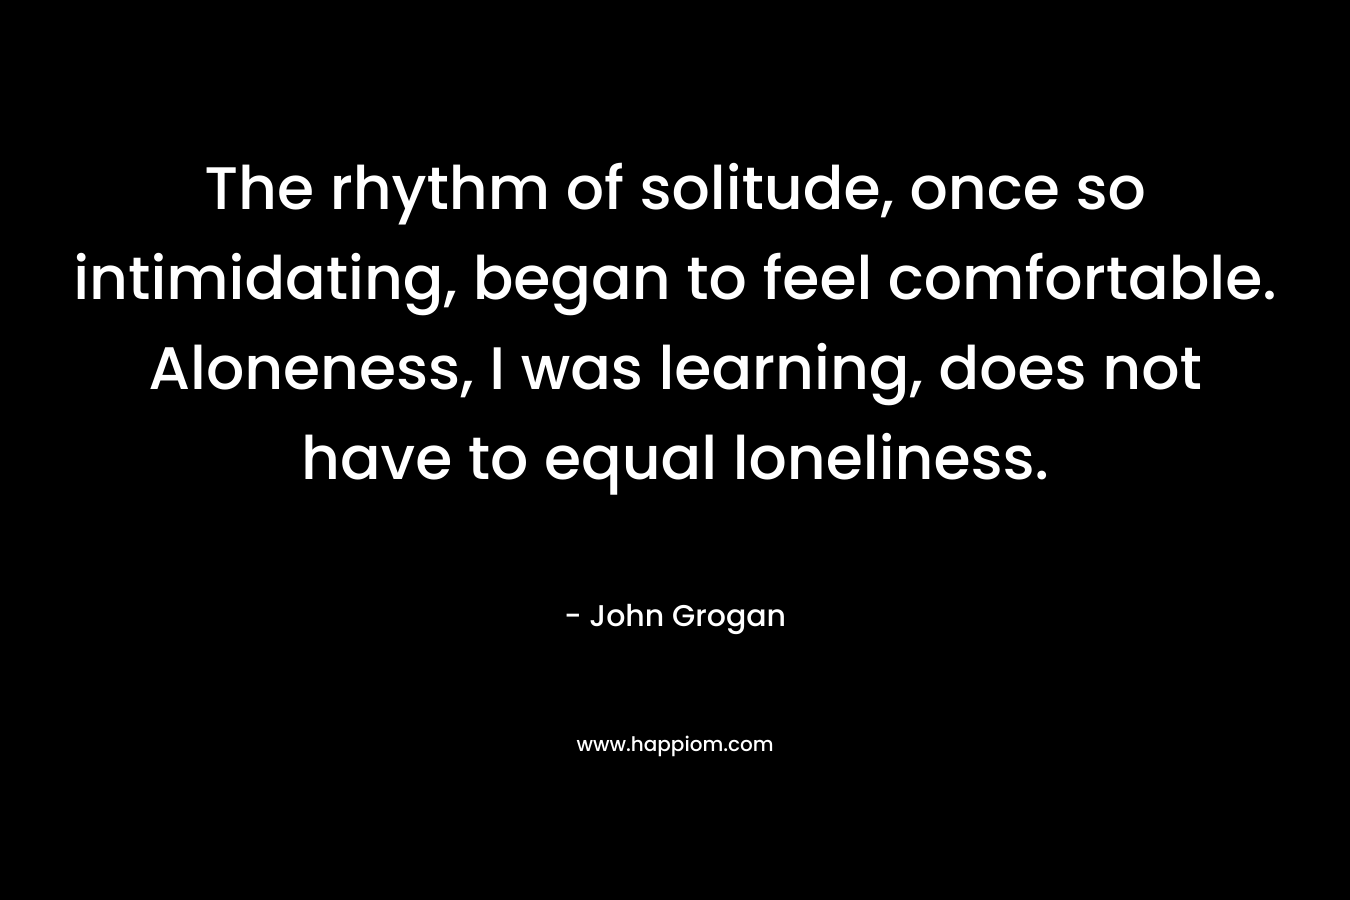 The rhythm of solitude, once so intimidating, began to feel comfortable. Aloneness, I was learning, does not have to equal loneliness. – John Grogan